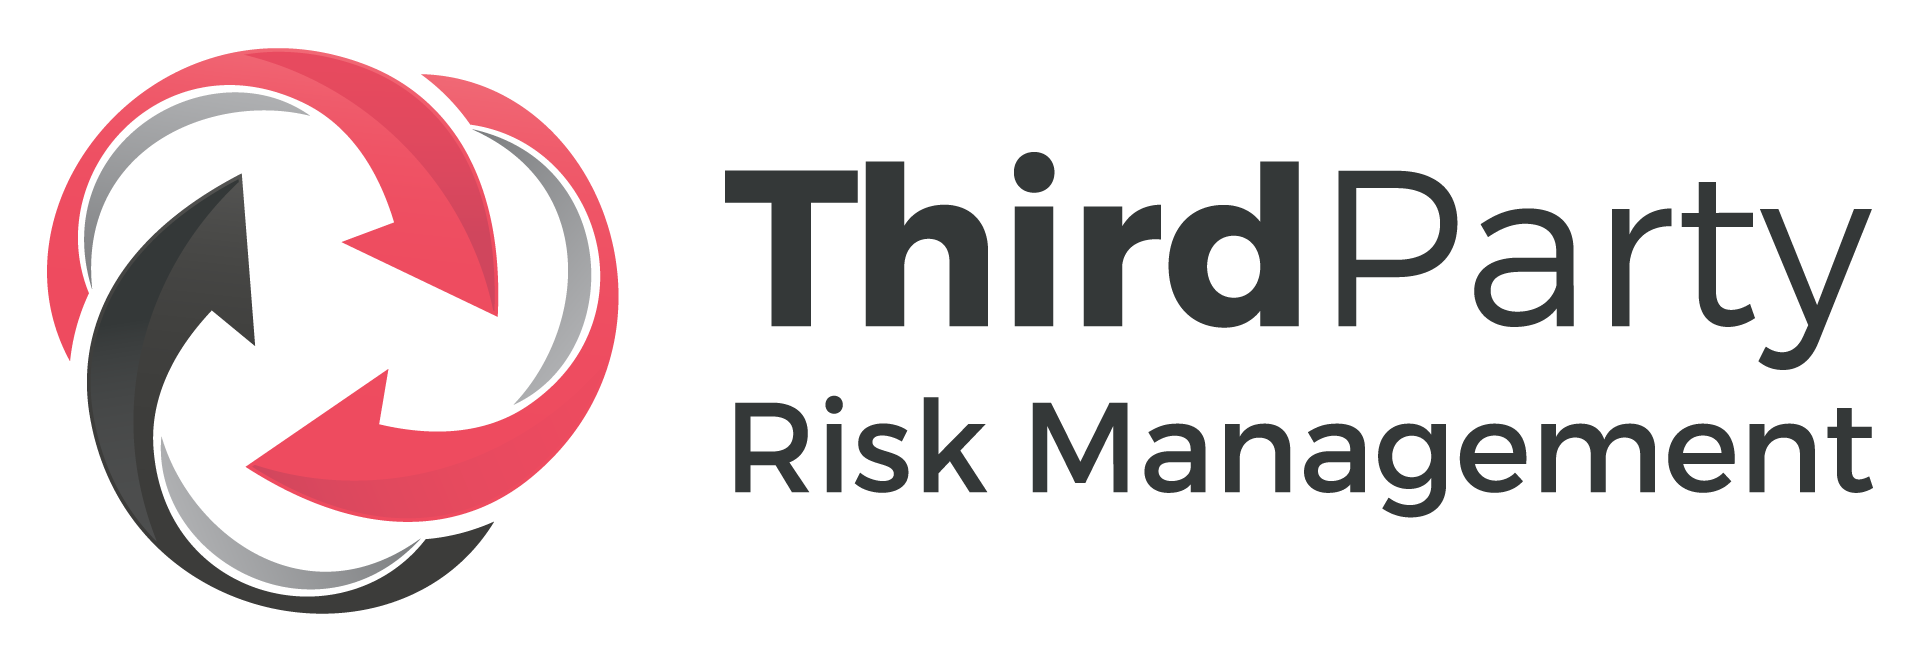 ThirdParty Risk Management